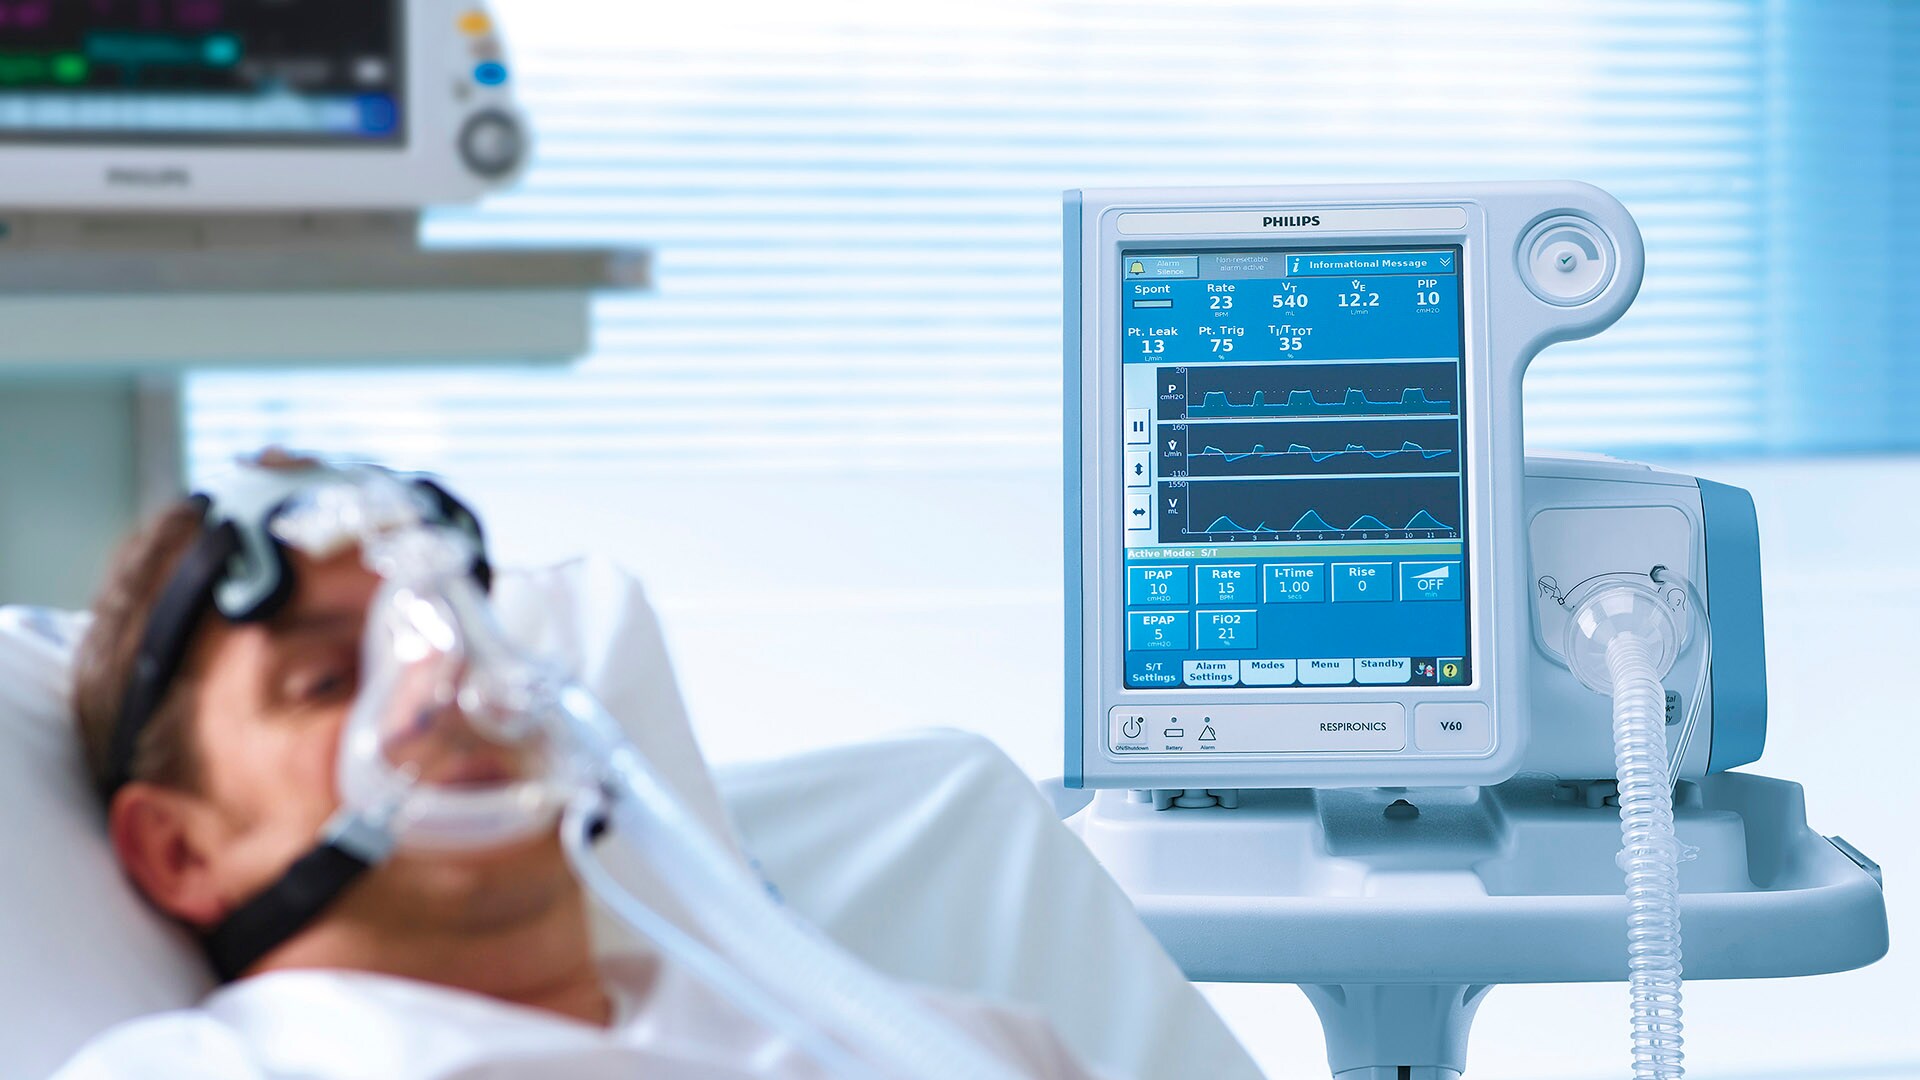 Philips details plans to increase its hospital ventilator production to 4,000 units/week by Q3 2020, and introduces its new Philips Respironics E30 ventilator with an immediate production of 15,000 units/week